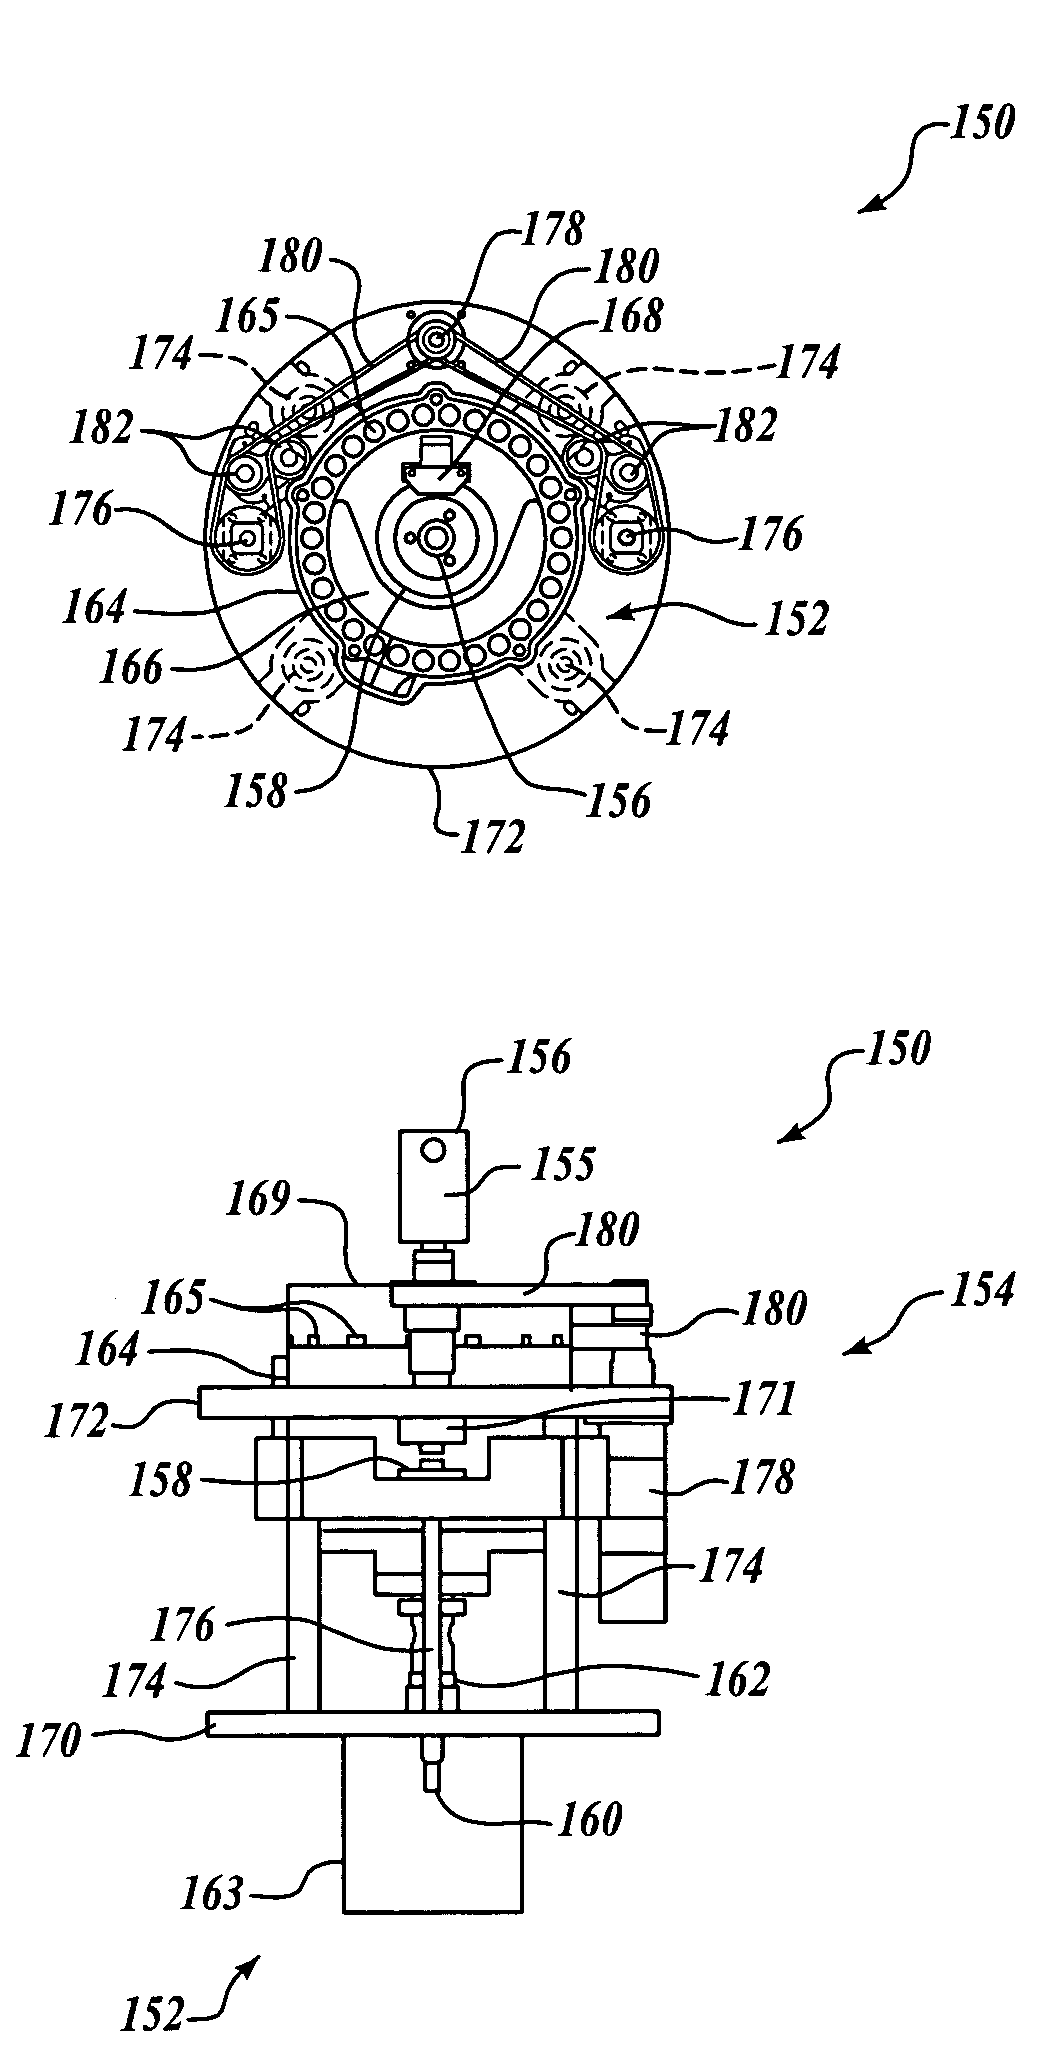 Apparatus and methods for servo-controlled manufacturing operations